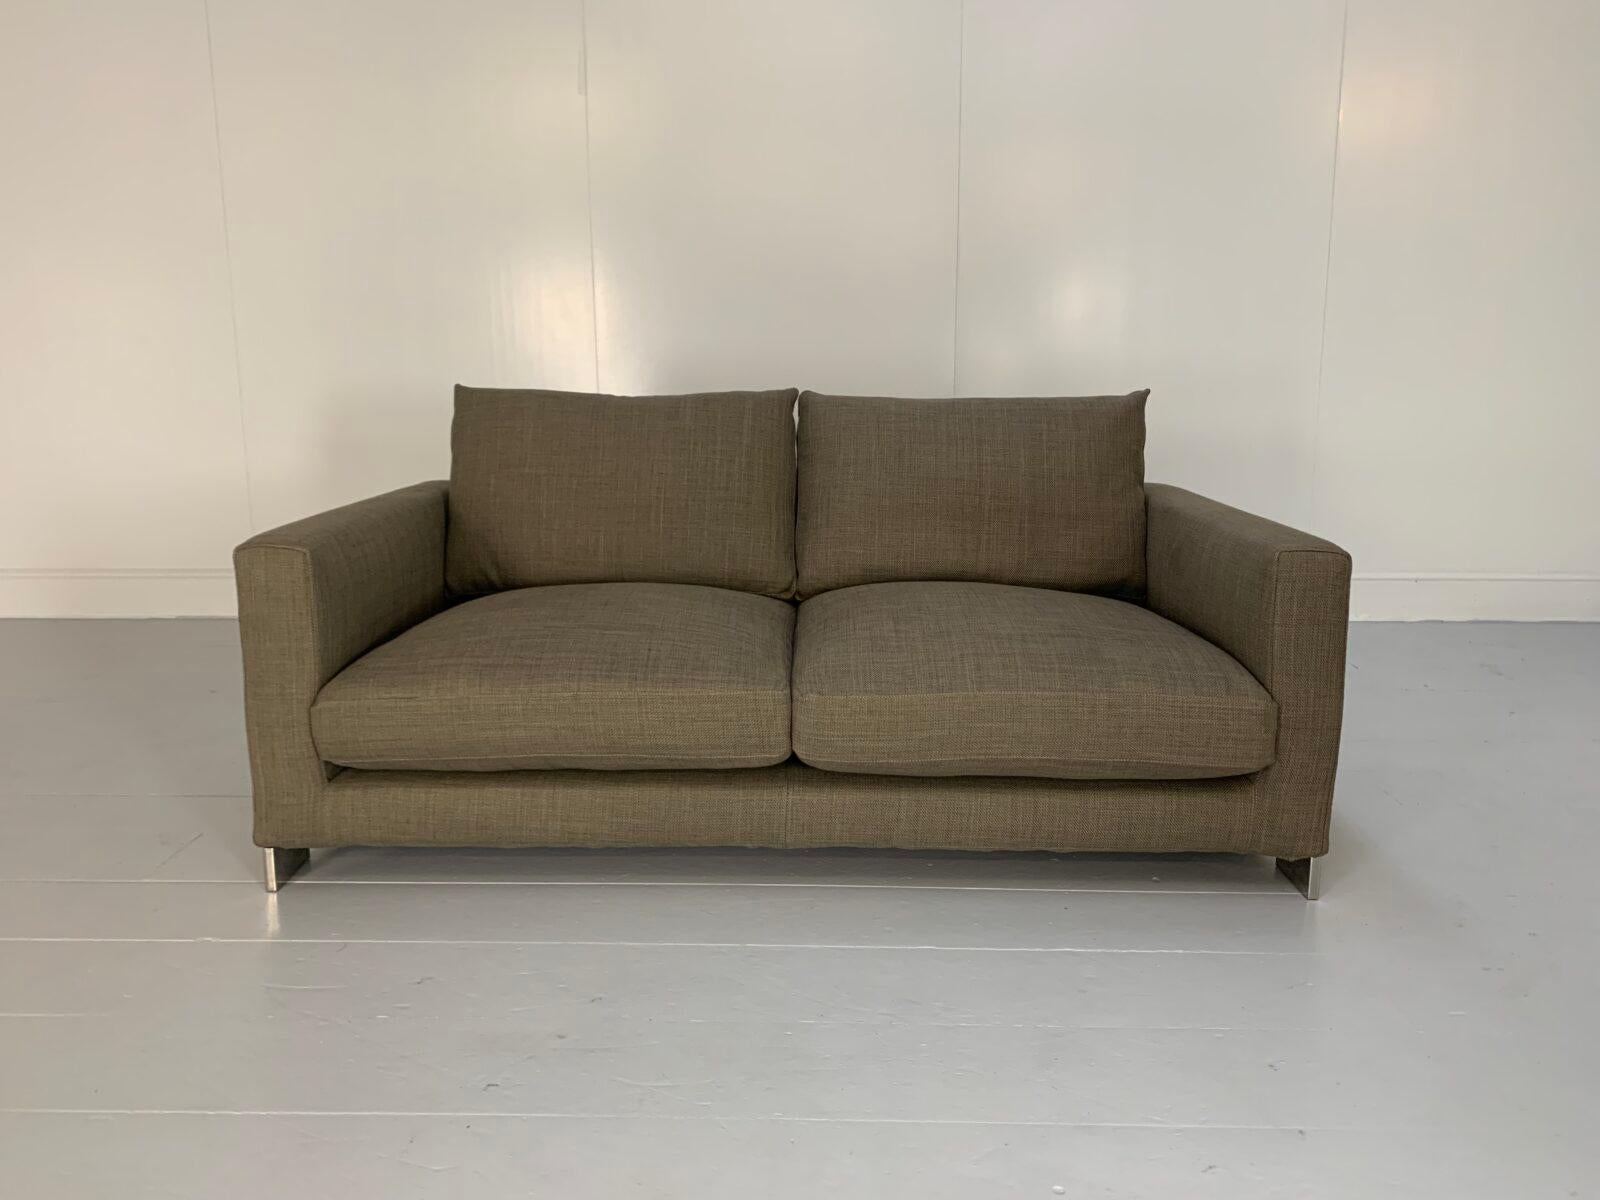 Hello Friends, and welcome to another unmissable offering from Lord Browns Furniture, the UK's premier resource for fine Sofas and Chairs.

On offer on this occasion is a superb, immaculate Molteni & C 